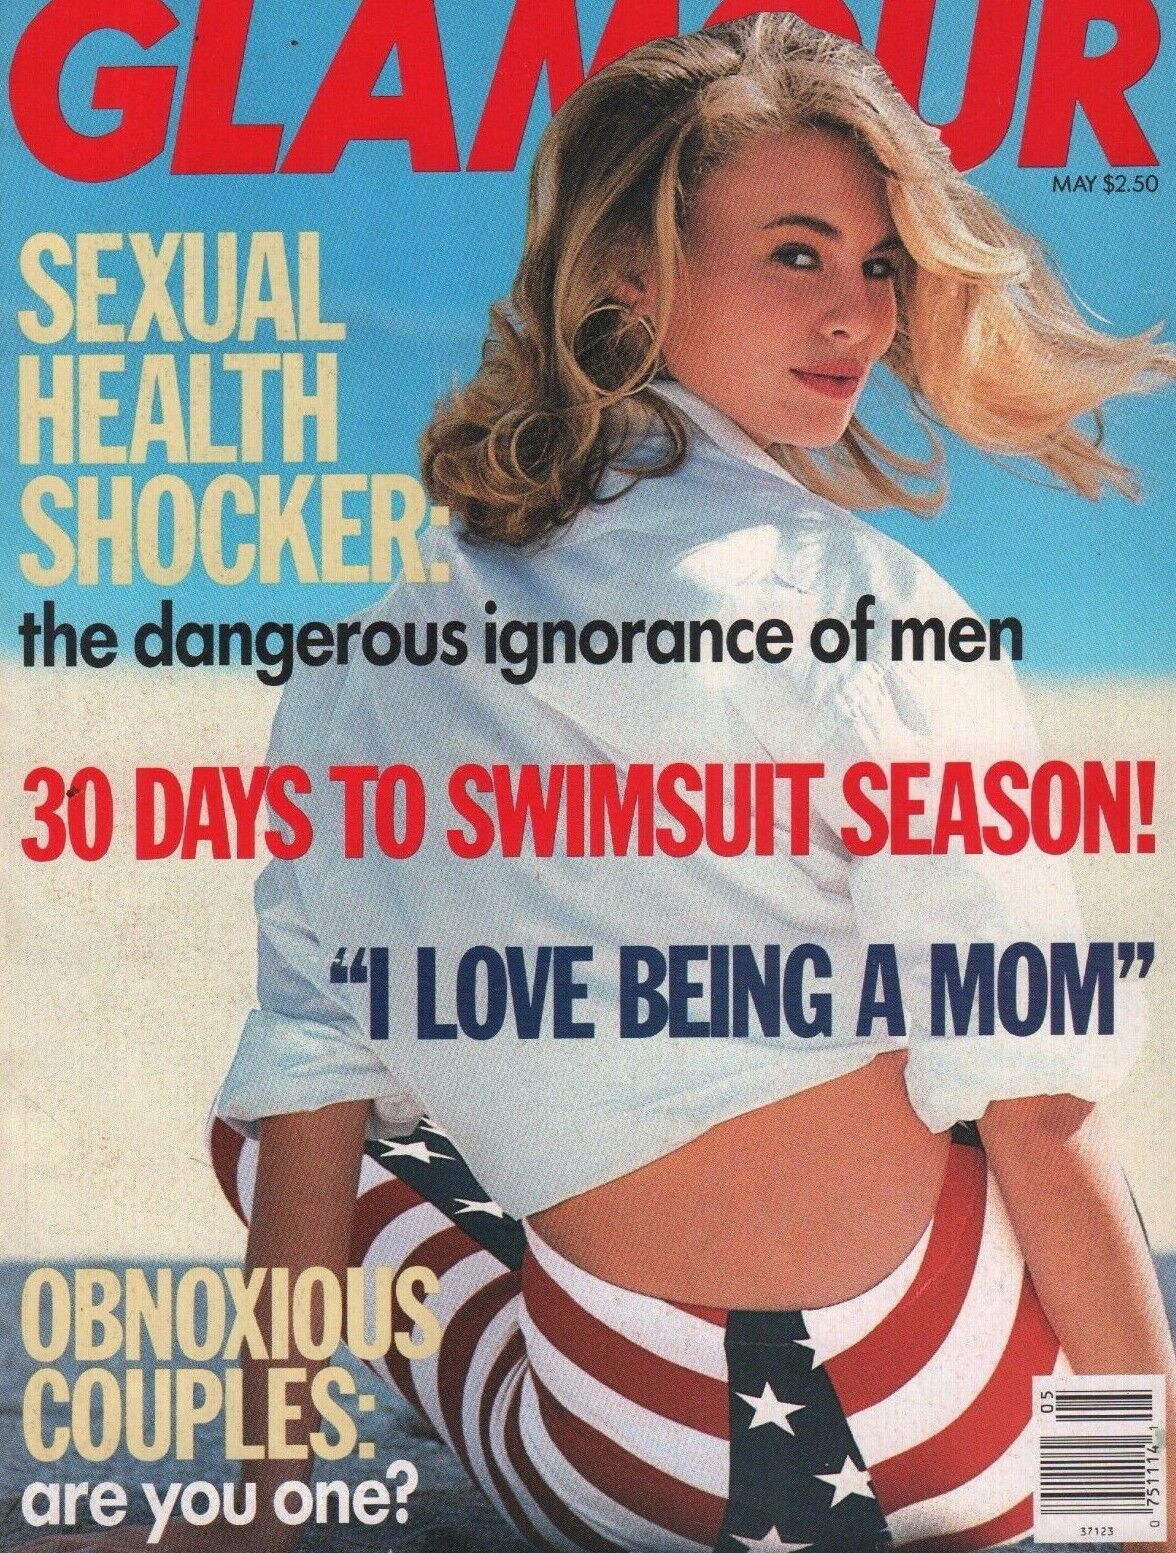 Glamour May 1991 magazine back issue Glamour magizine back copy Glamour May 1991 Womens Magazine Back Issue Published by Conde Nast Publications. Sexual Health Shocker: The Dangerous Ignorance Of Men.